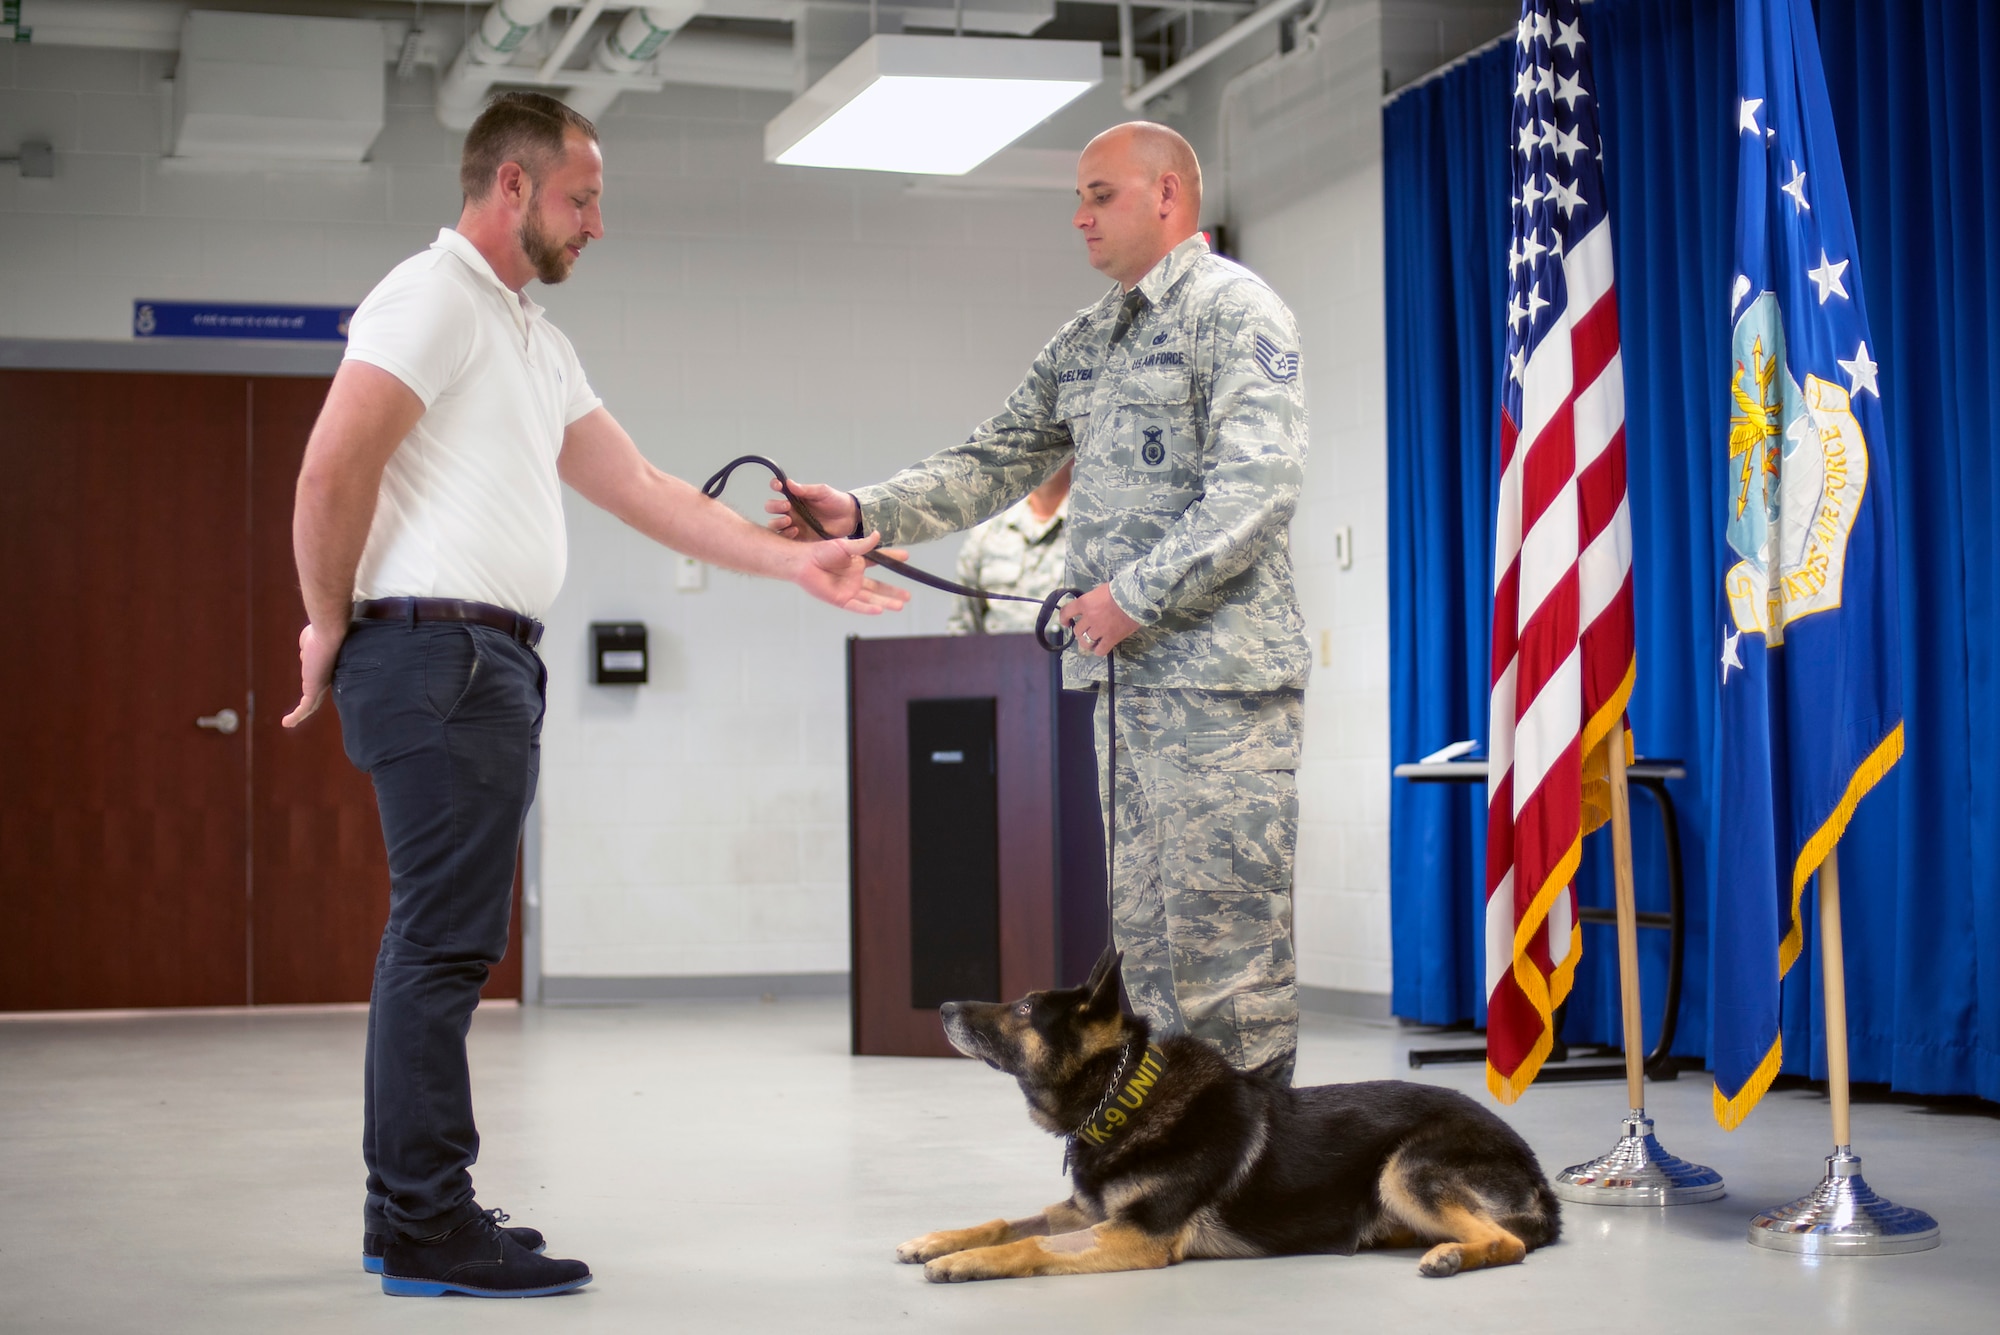 U.S. Air Force Staff Sgt. Matthew McElyea, a military working dog trainer, hands off the leash and the responsibility of taking care of Apacs to his new adopter Brandon Denton, a former military working dog handler, March 9, 2018, at MacDill Air Force Base, Fla. Denton was Apacs handler for the first three years of his service.